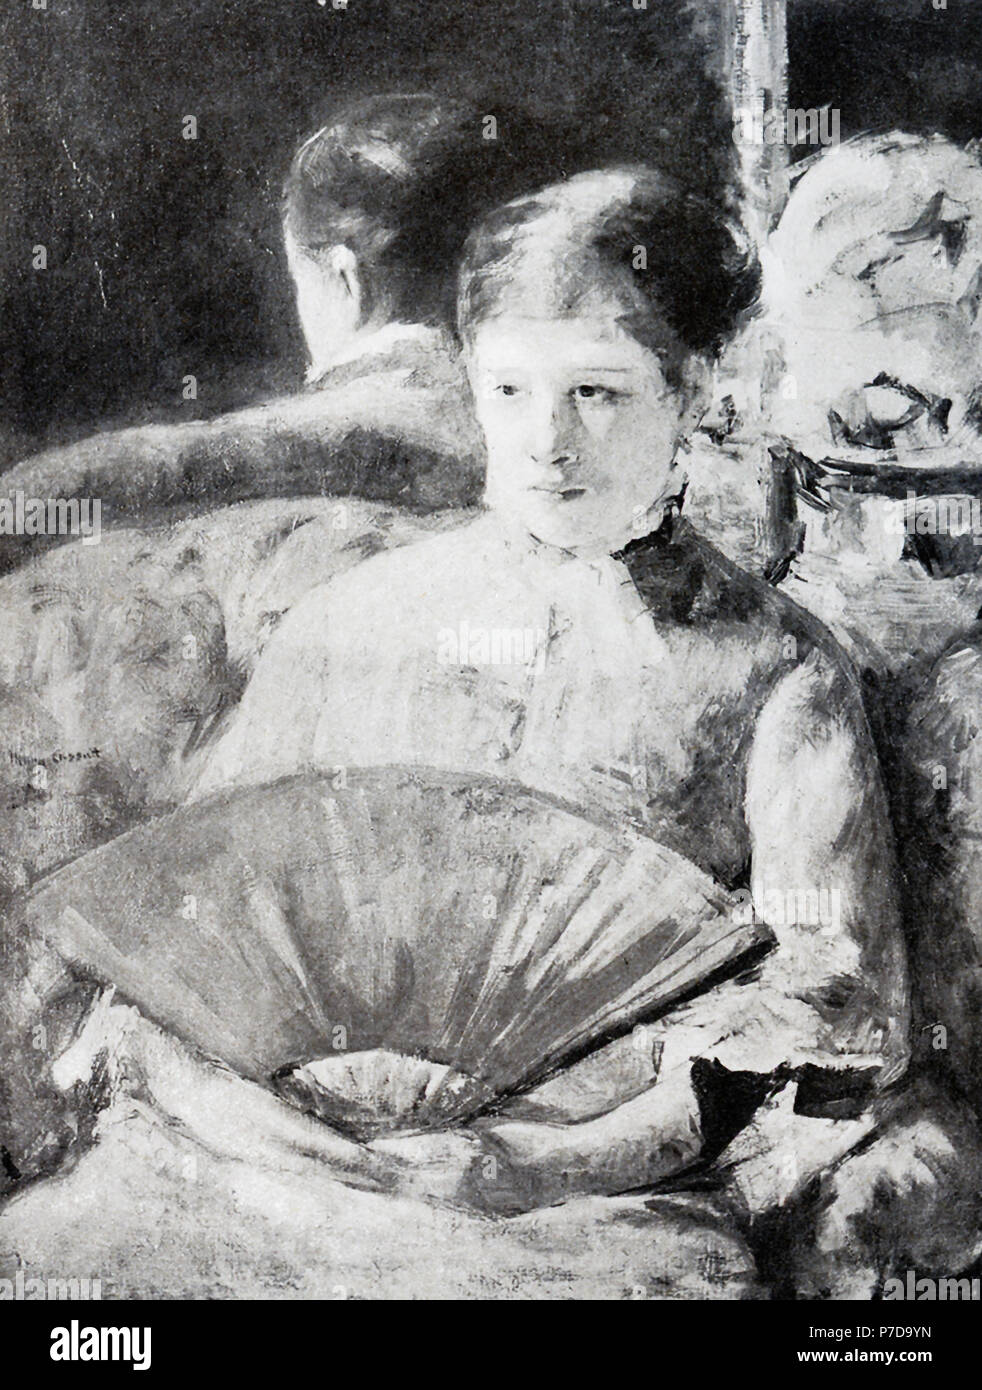 Mary Cassatt (1844-1926) was the only American artist to exhibit with the impressionists in Paris. She became known for her paintings of domestic moments, especially her pictures of women and children. Her works were among the first impressionist works seen in the United States. This painting is titled ”Woman with a Fan.' Stock Photo